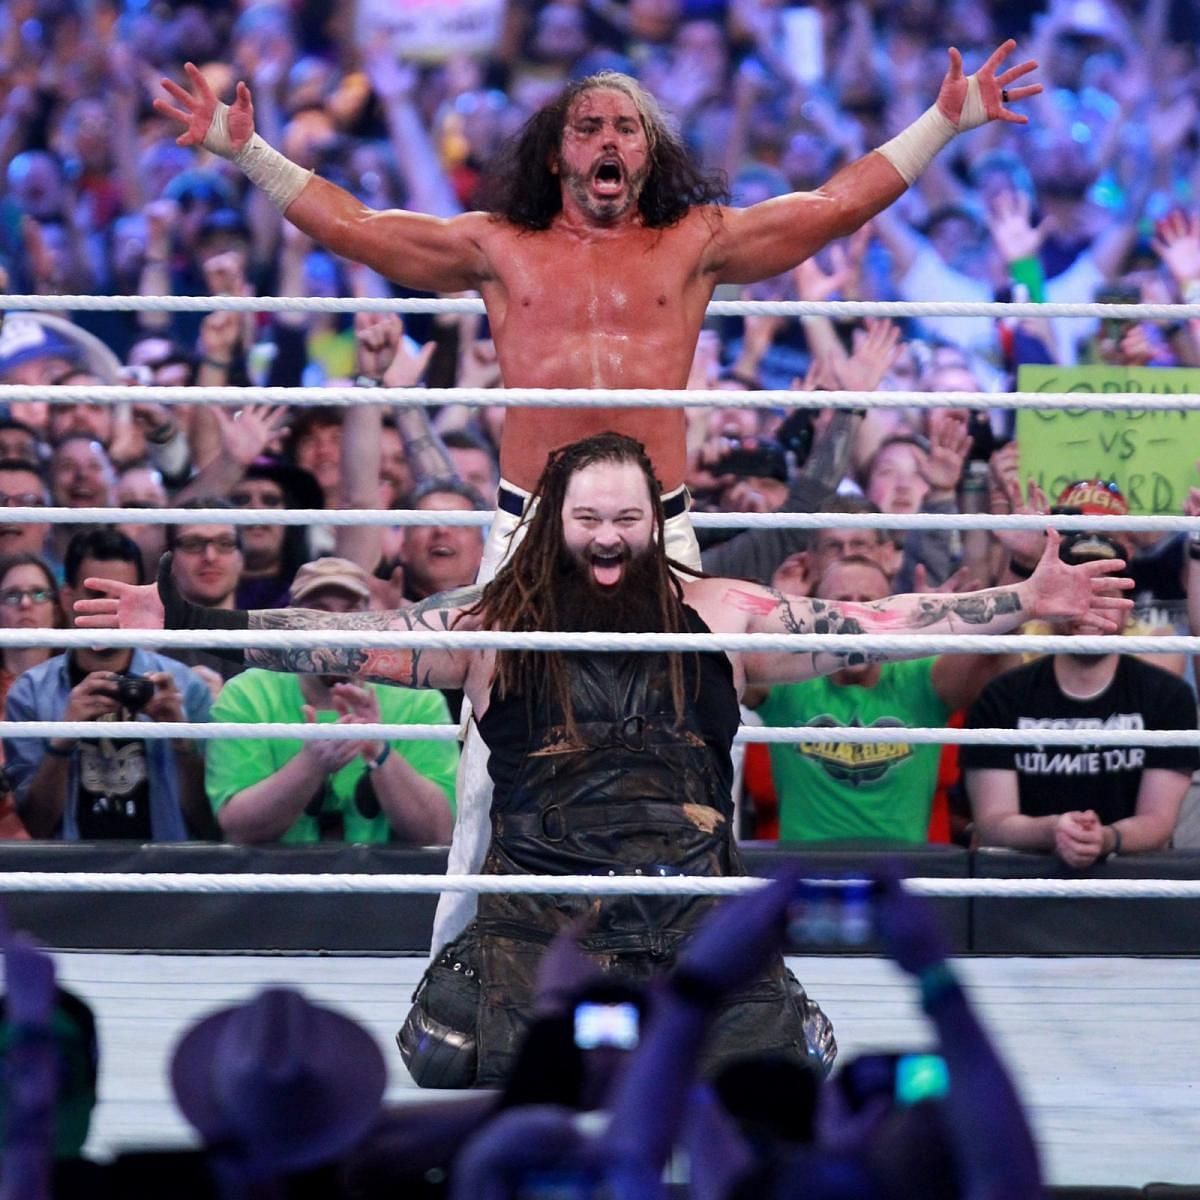 Winning with the help of former enemy, Bray Wyatt, Matt Hardy&#039;s victory was used to set up a tag team made up of the two old rivals